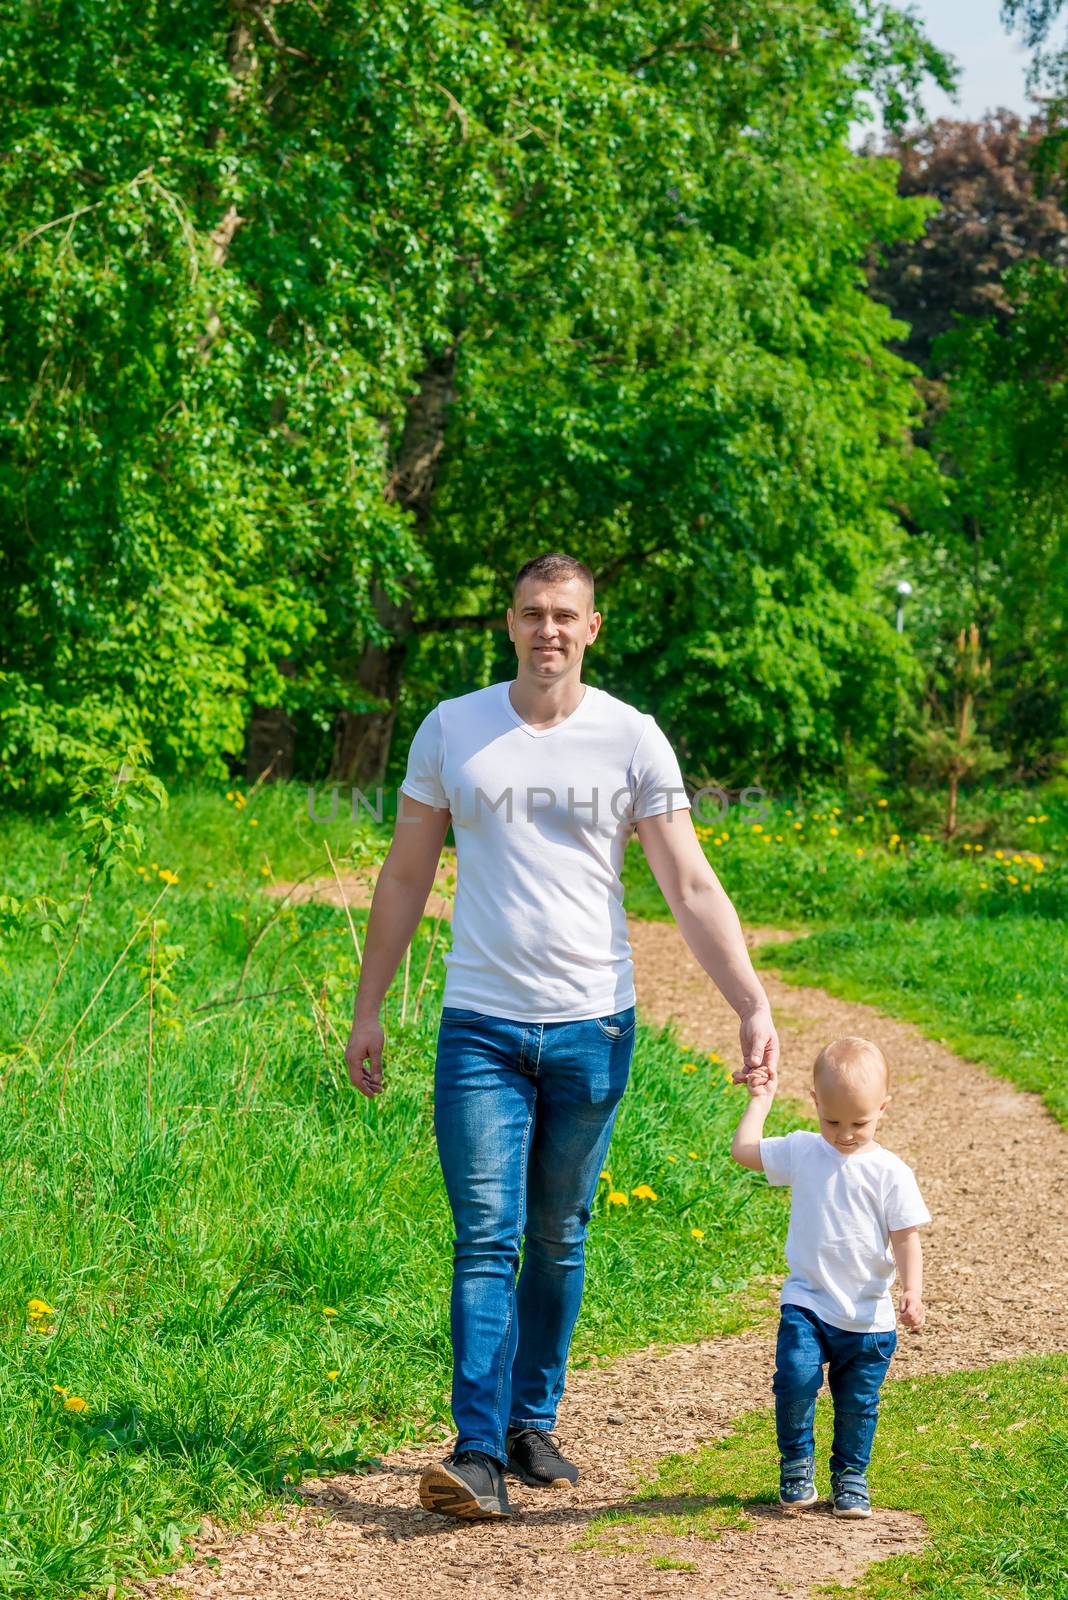 dad with his son for a walk in the park